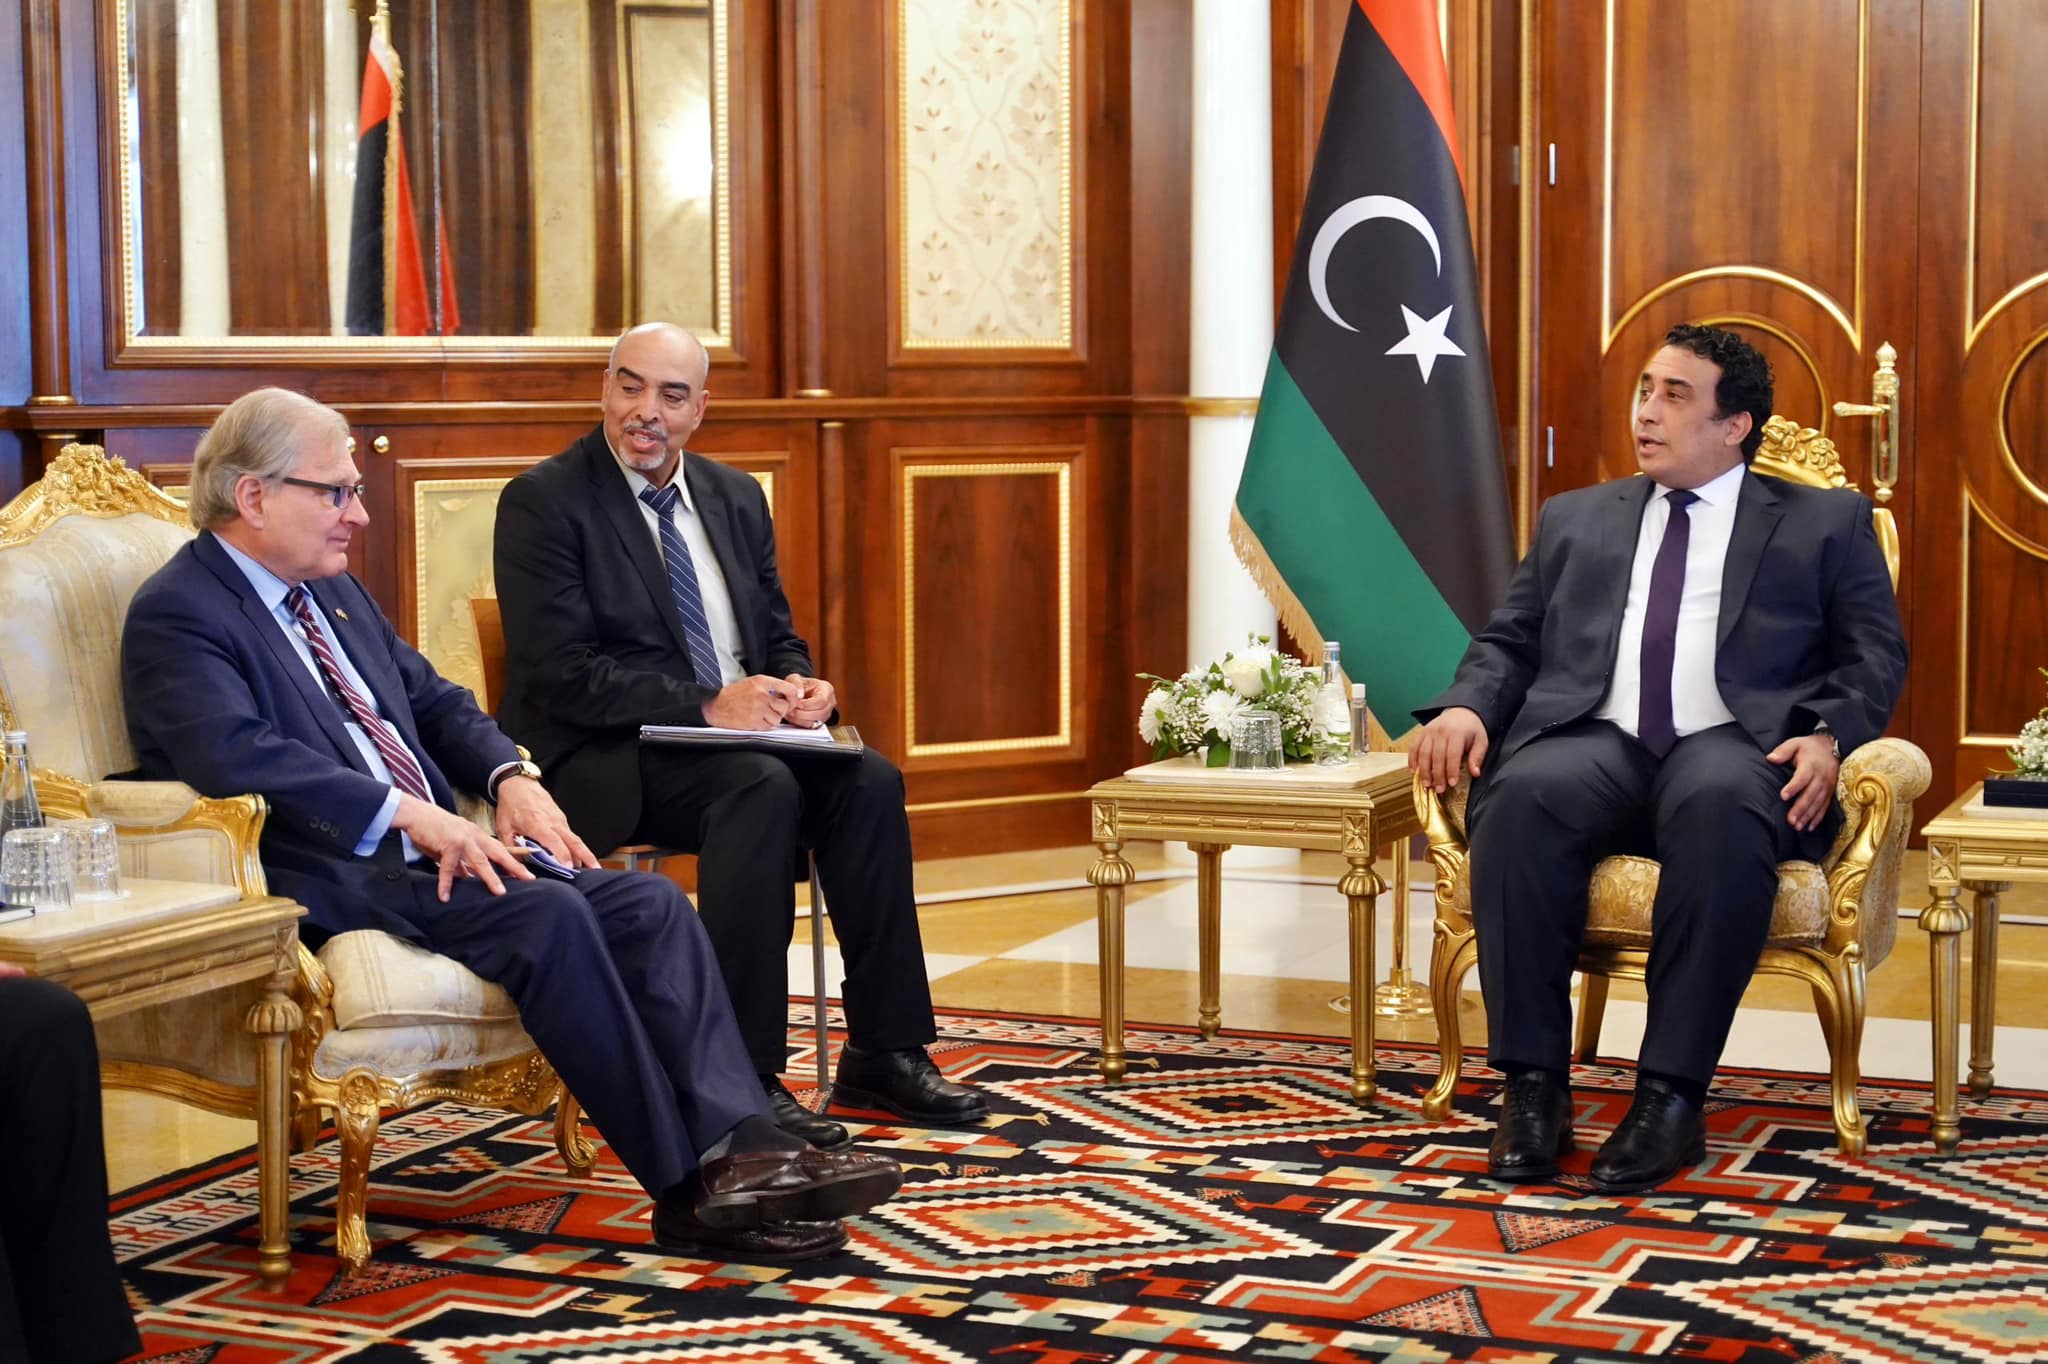 Al-Manfi discusses with Norland the developments in the political situation in Libya and activating the work of the Finance Committee.